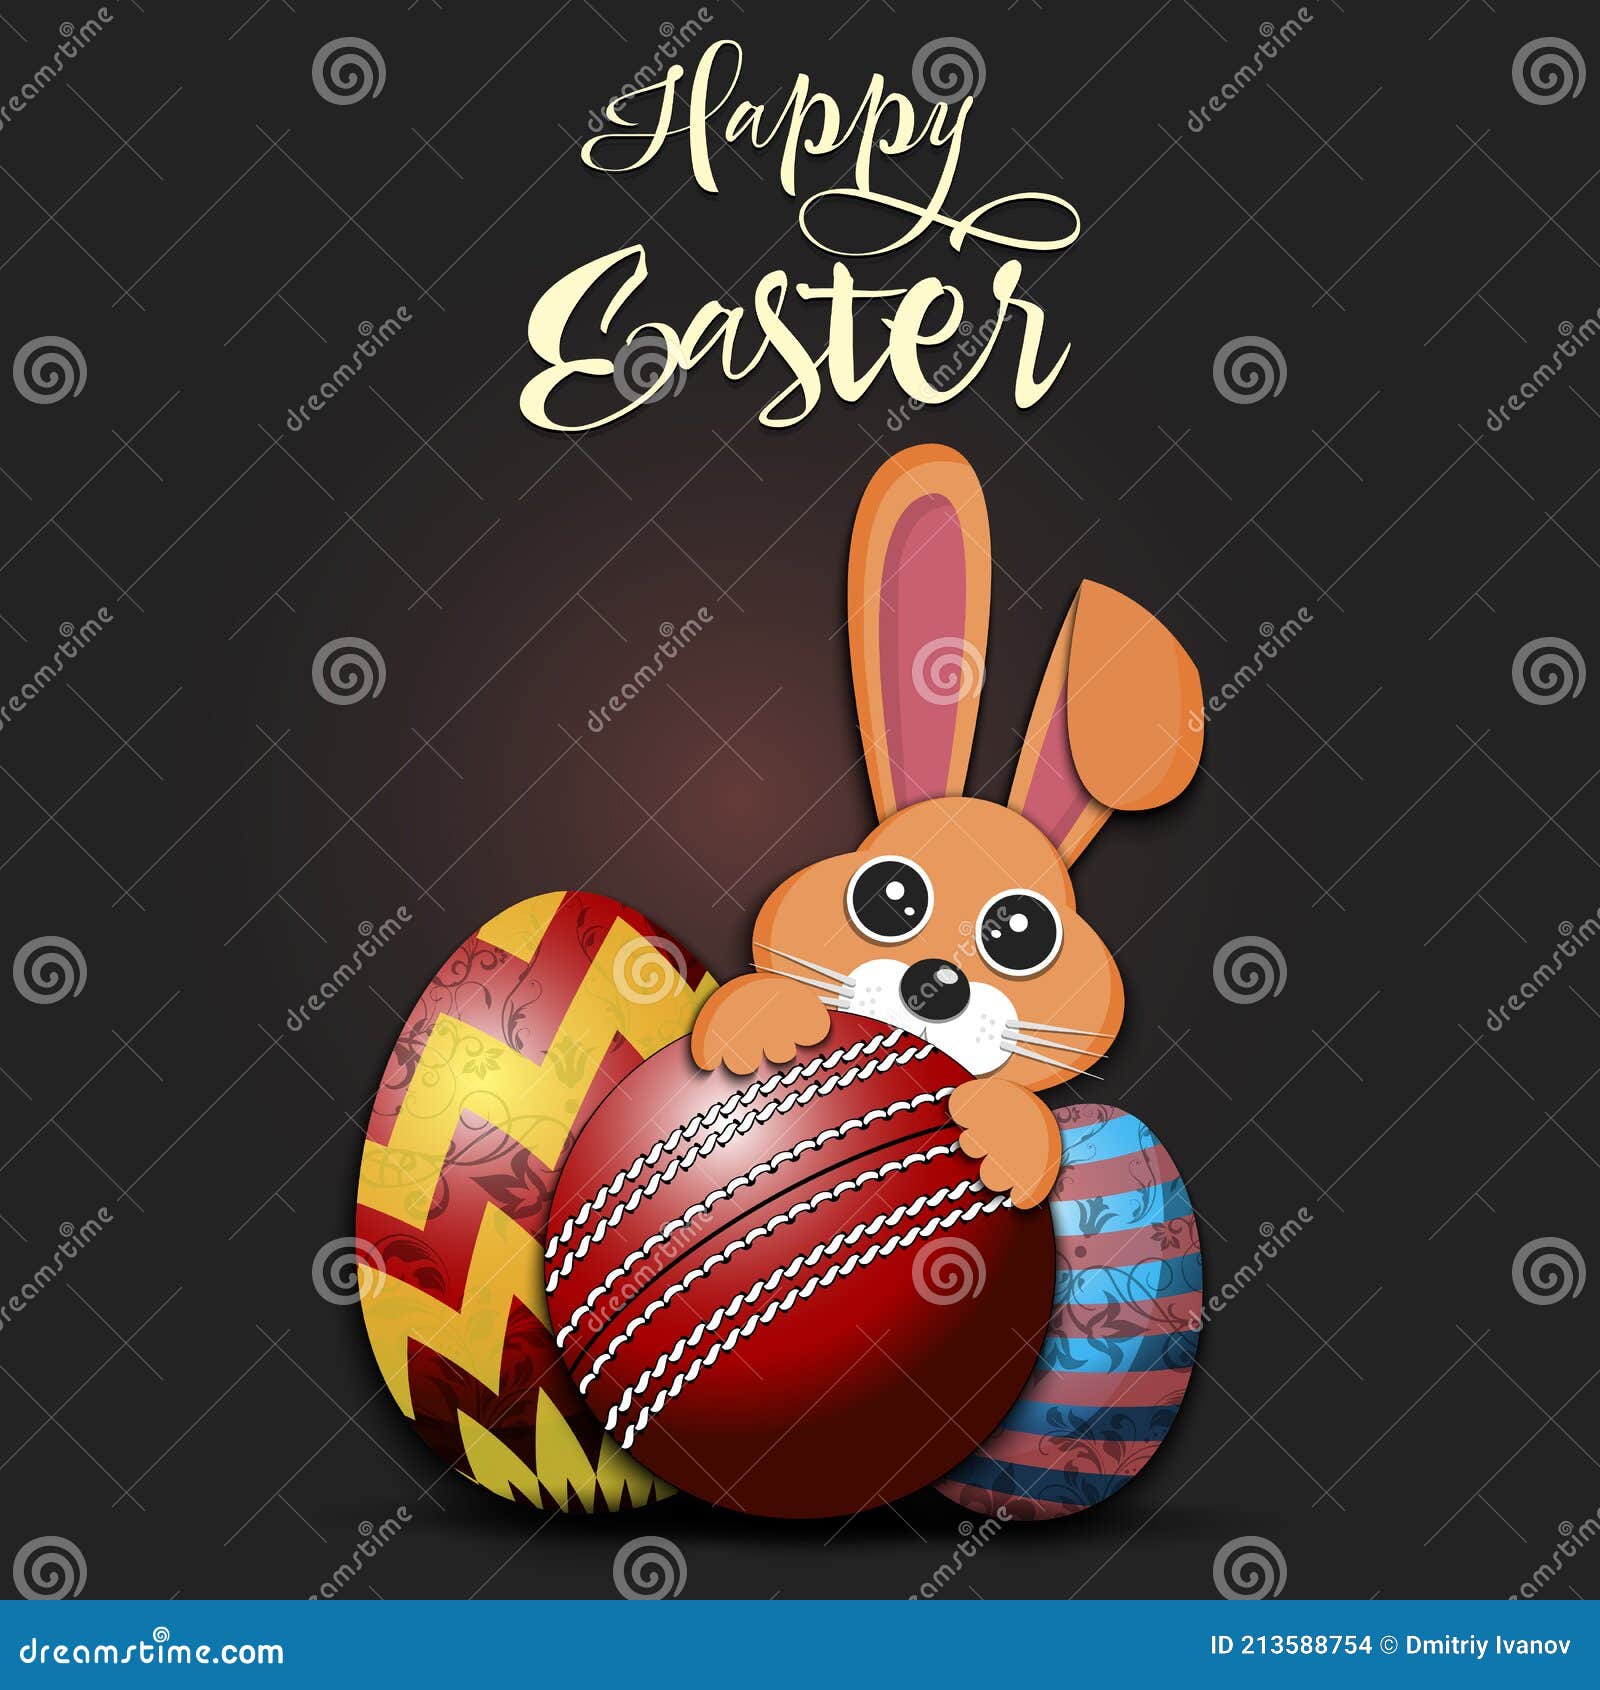 Happy Easter. Easter Eggs, Rabbit and Cricket Ball Stock Vector ...